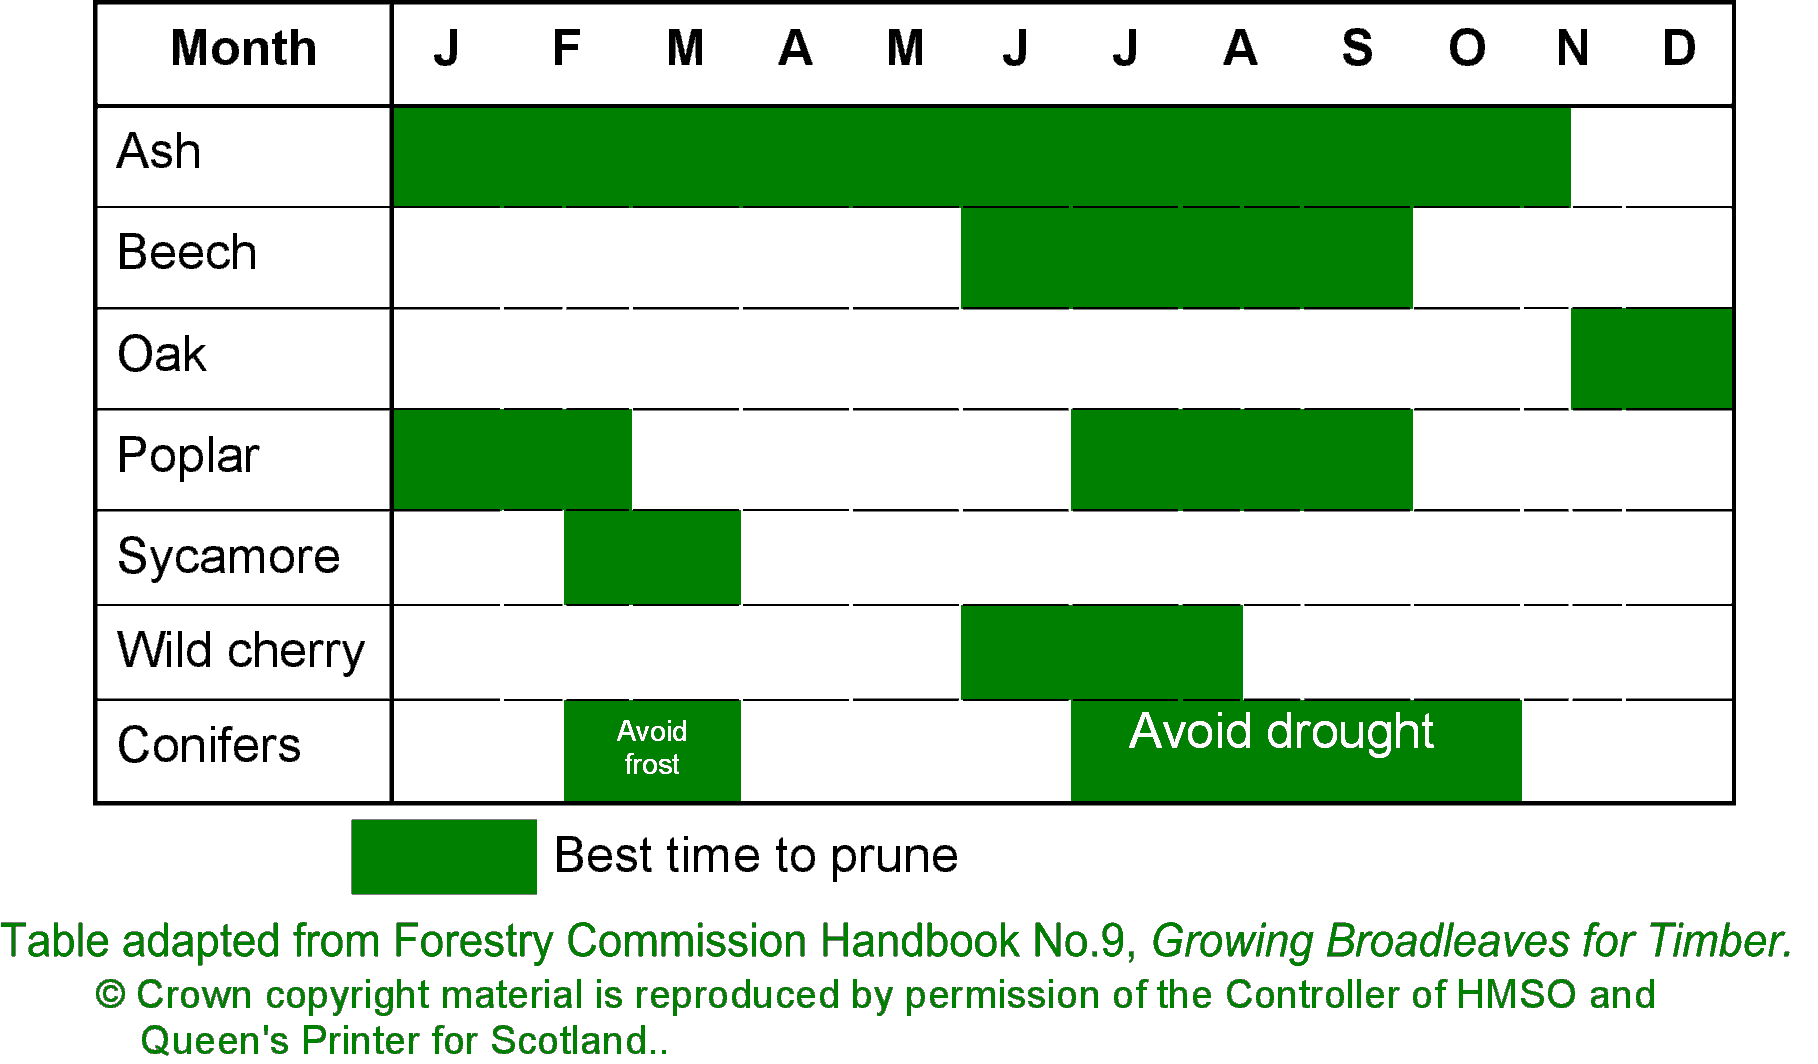 Table adapted from FC Handbook No. 9, Growing Broadleaves for Timber.  Crown copyright material is reproduced by permission of the Controller of HMSO and Queen's Printer for Scotland.